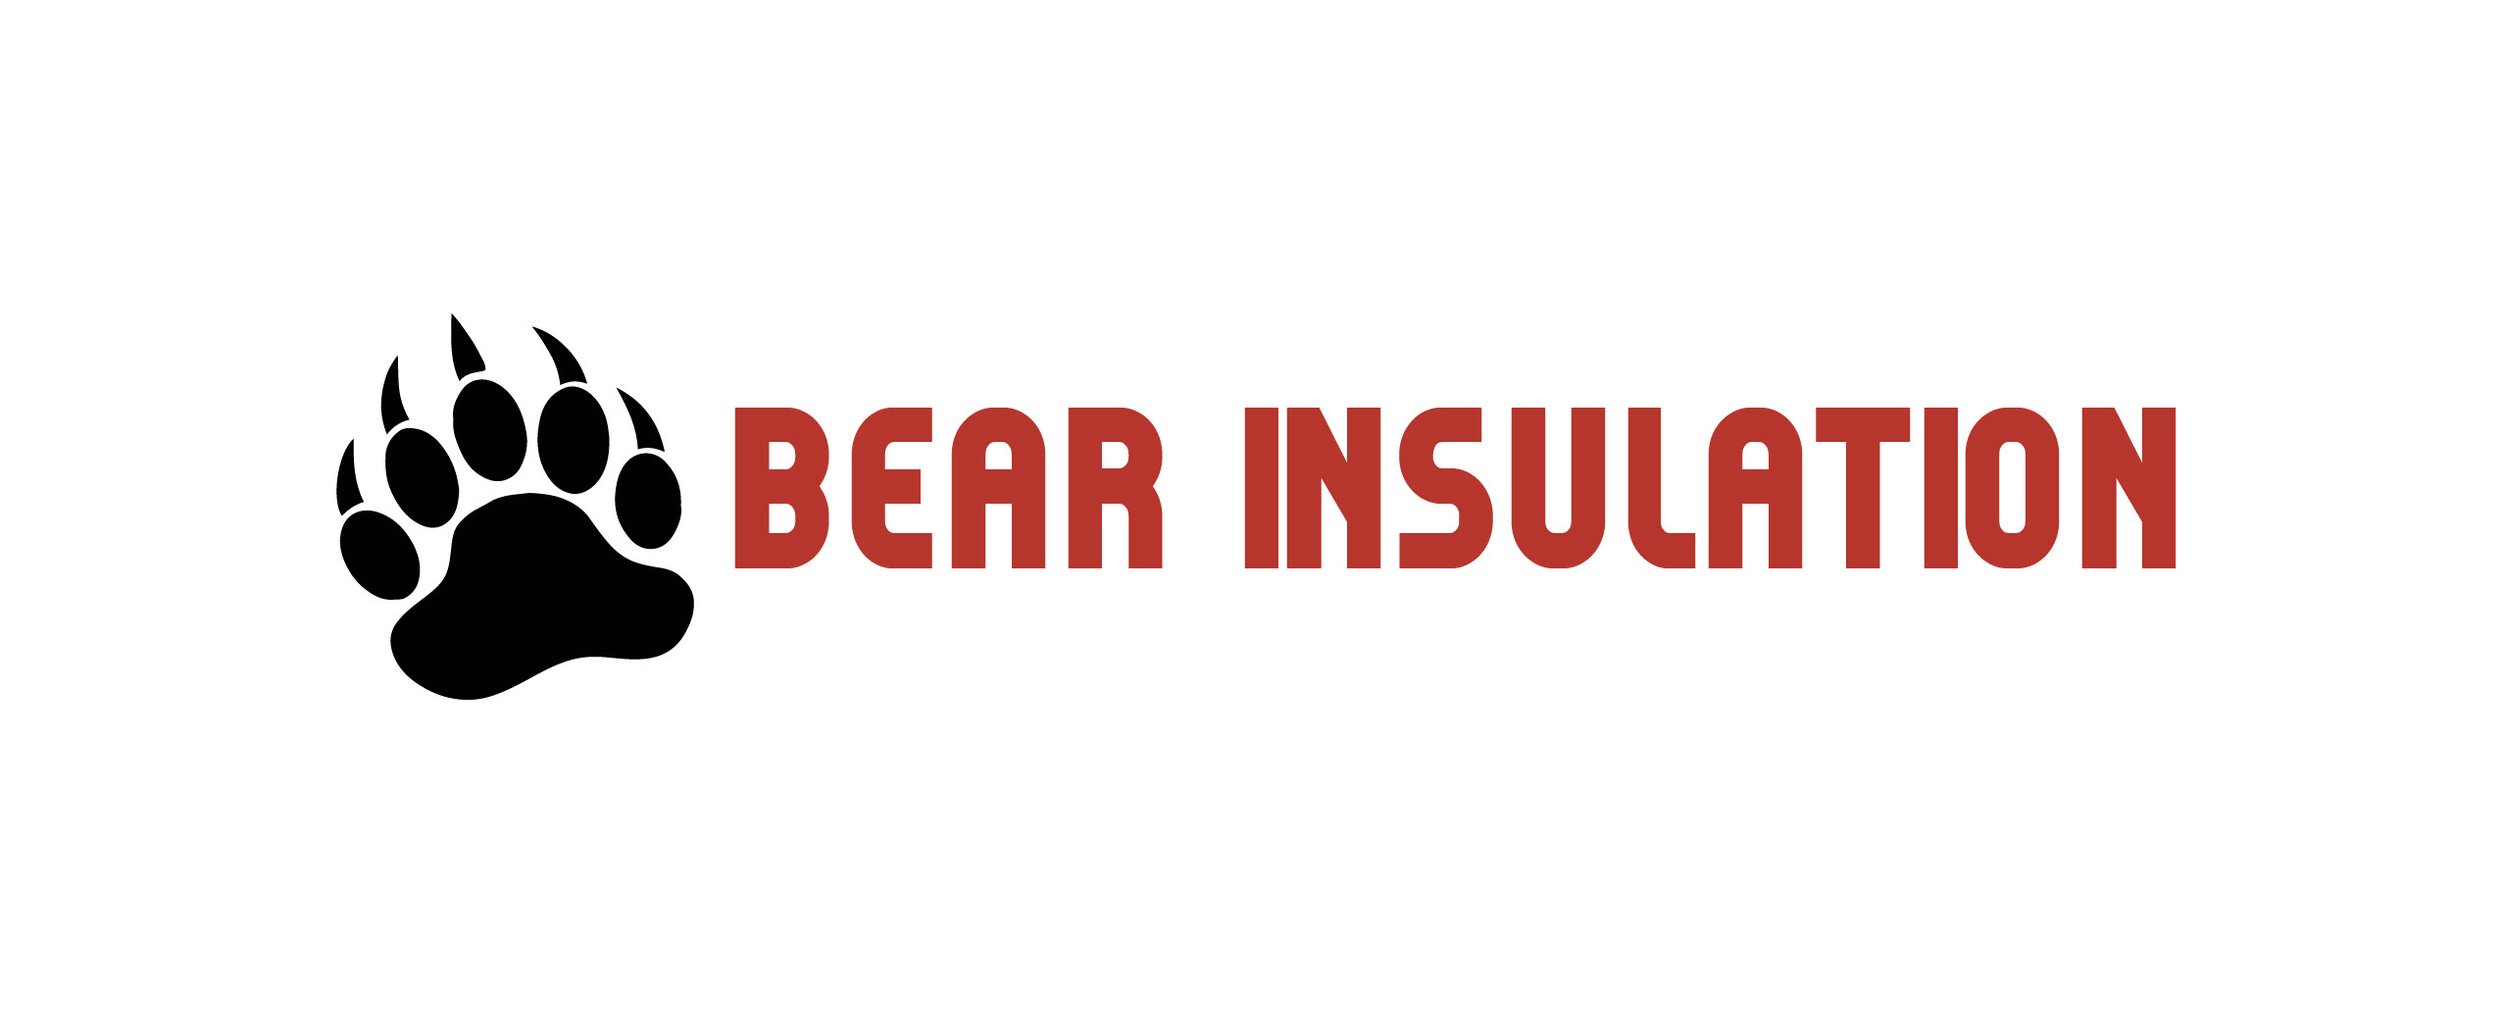 Bear Insulation with paw w white space.jpg